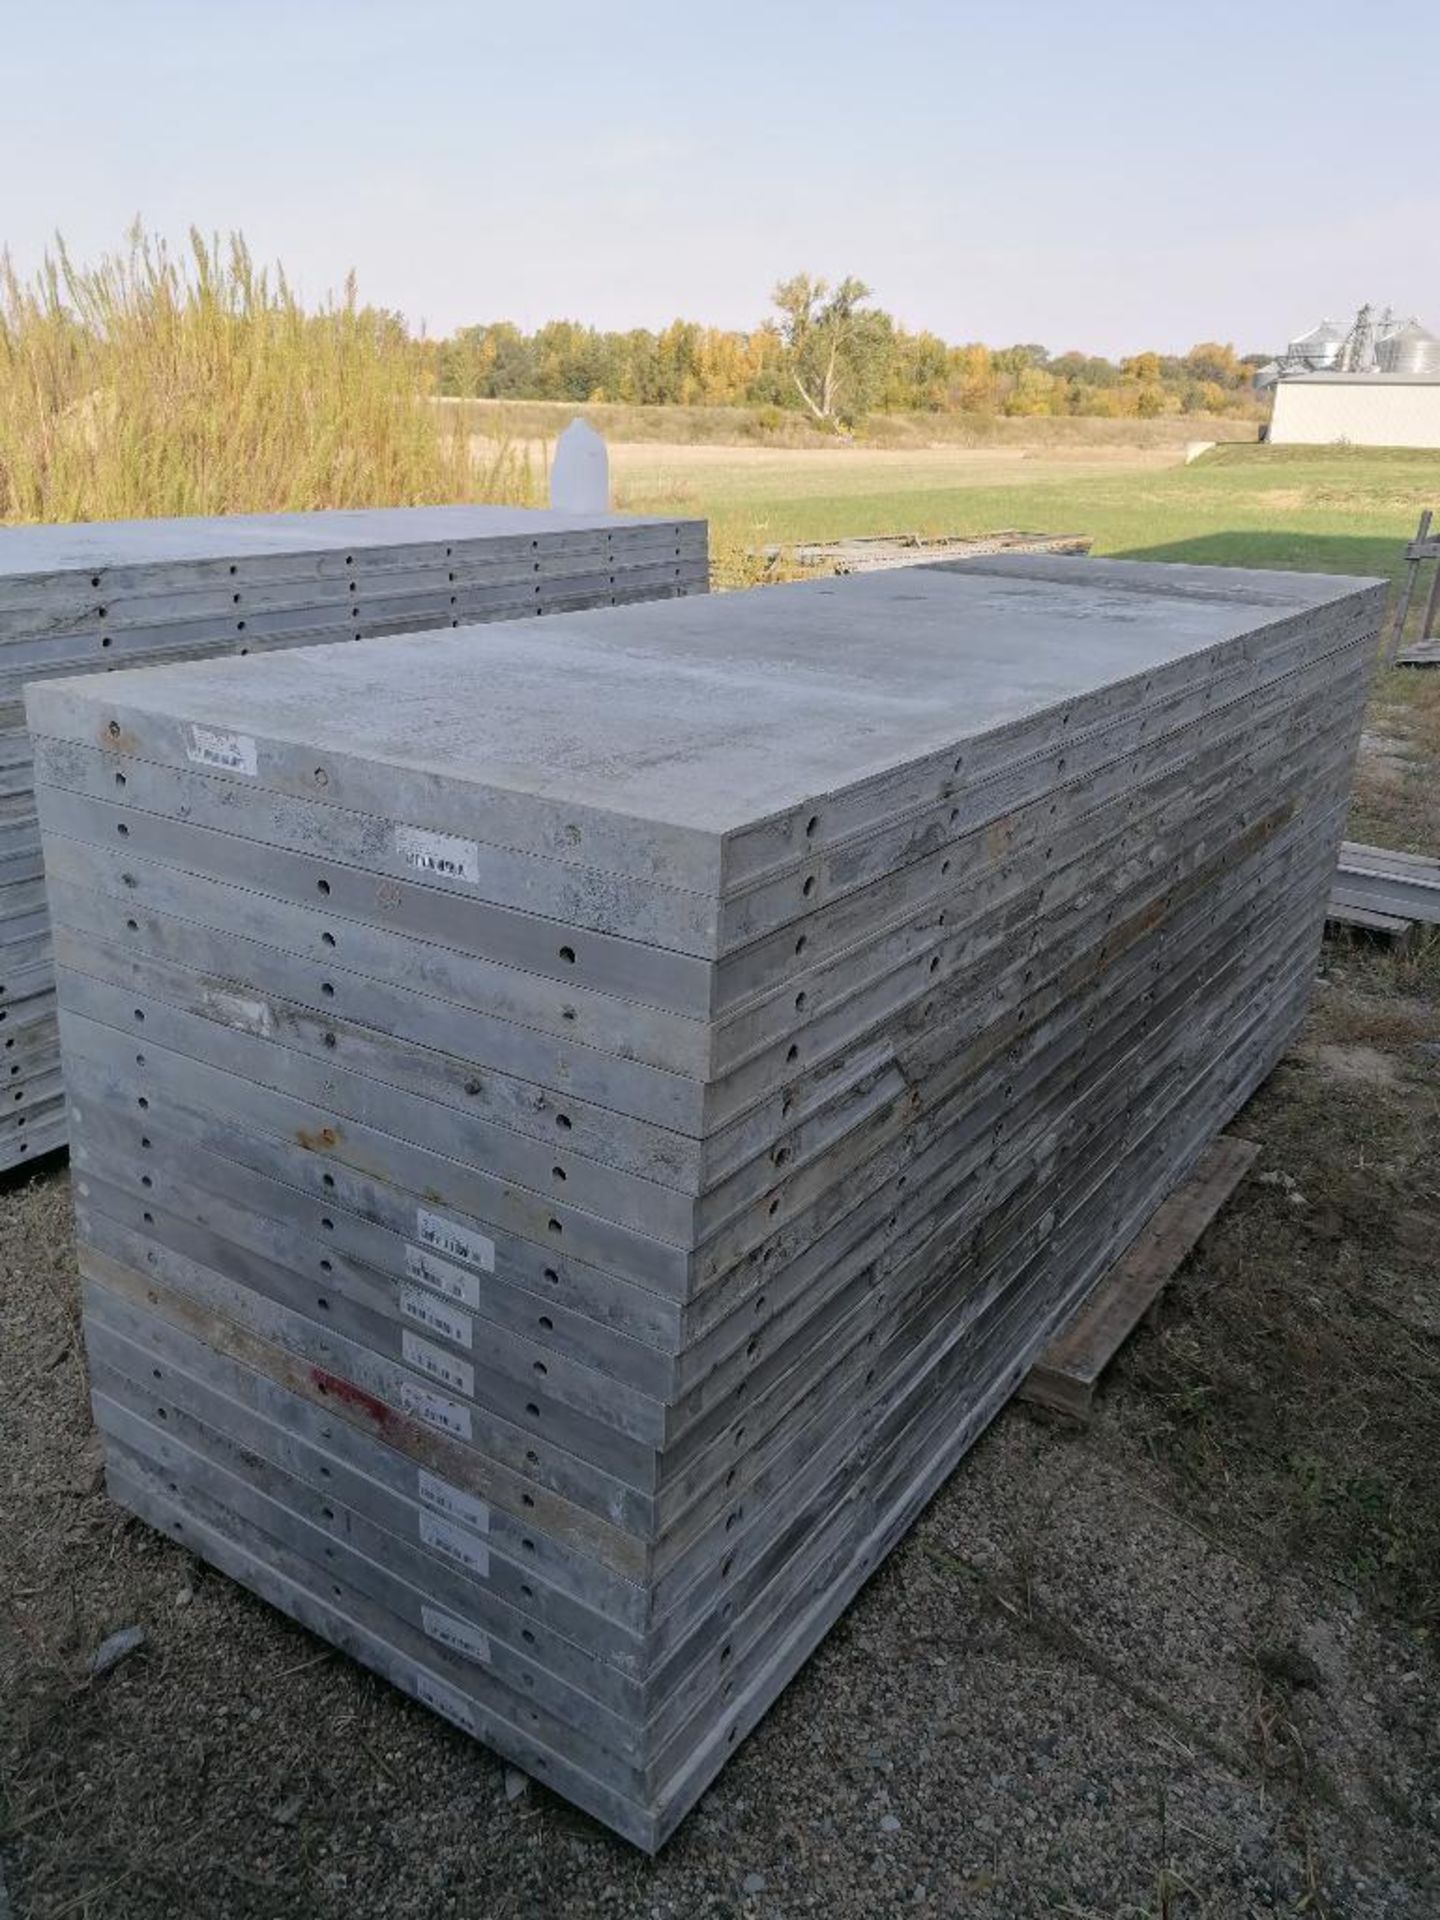 (20) 36" x 9' Precise Smooth Aluminum Concrete Forms 6-12 Hole Pattern. Located in Woodbine, IA - Image 3 of 8